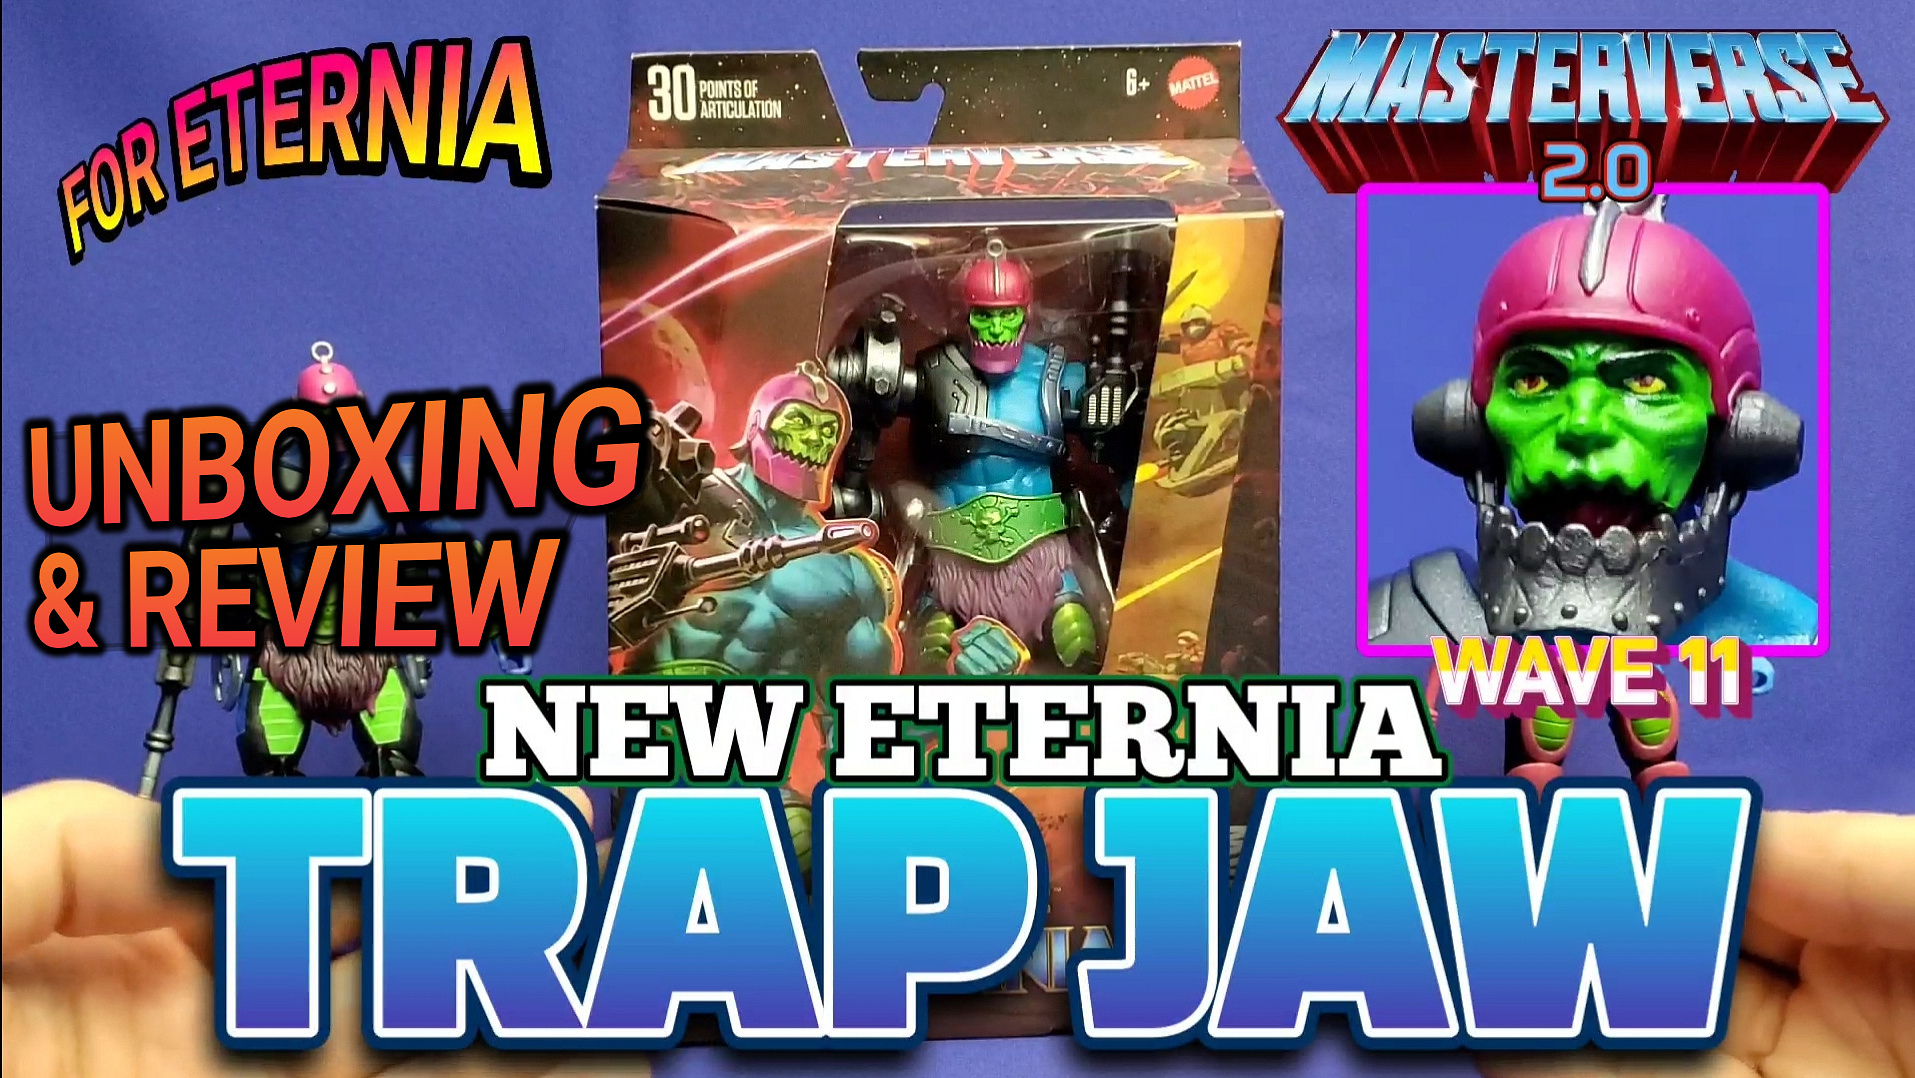 UNBOXING & REVIEW Masterverse TRAP JAW New Eternia Masters of the Universe Figure